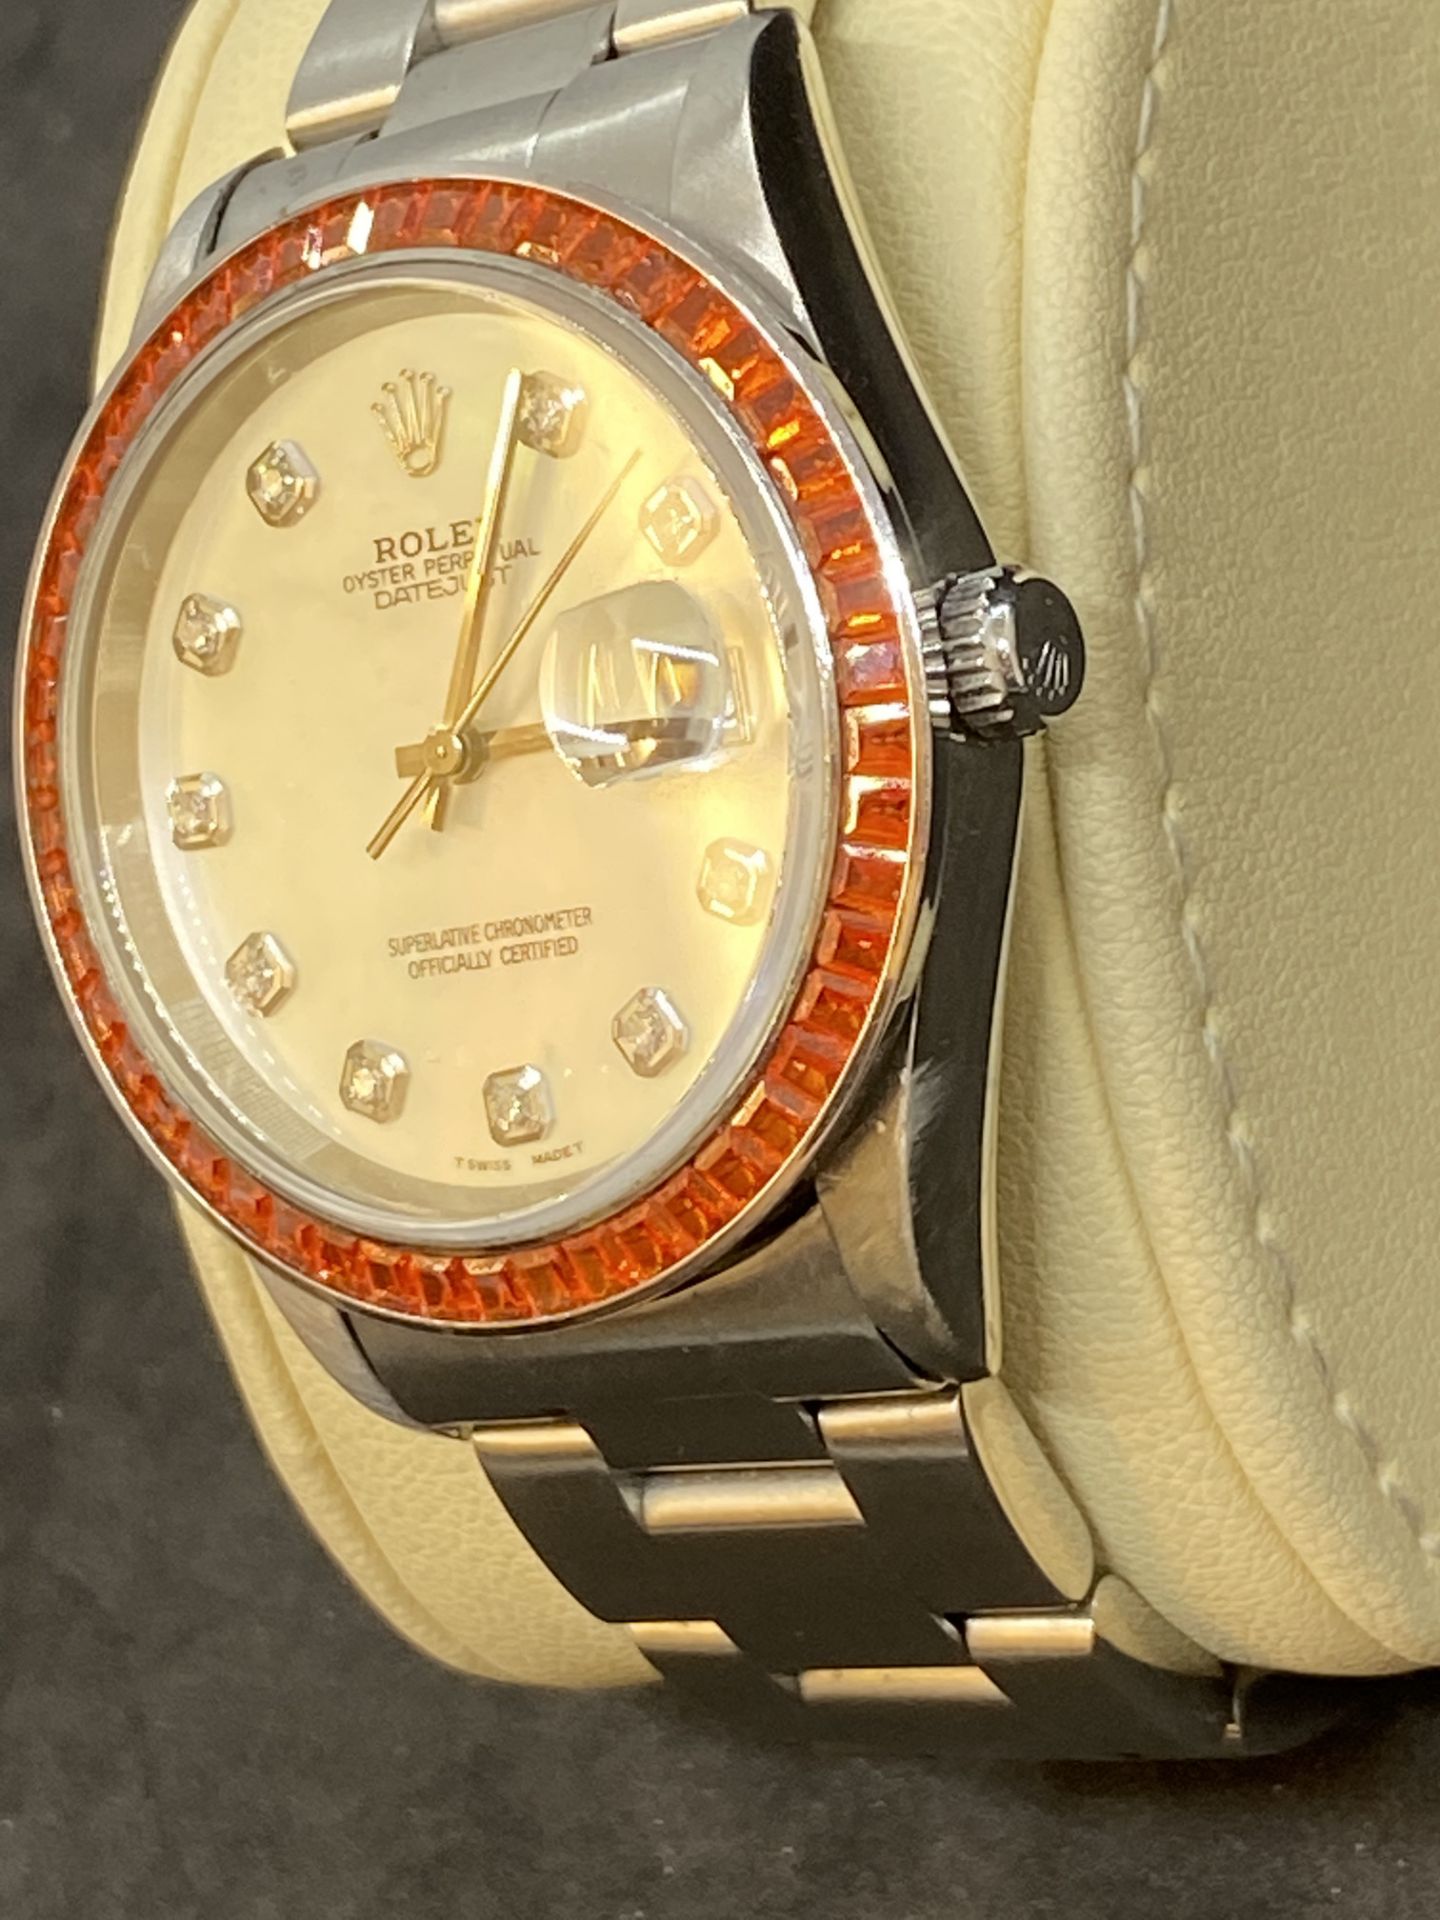 STAINLESS STEEL AUTOMATIC ROLEX WITH DIAMOND DOT DIAL & ORANGE BEZEL - Image 4 of 10